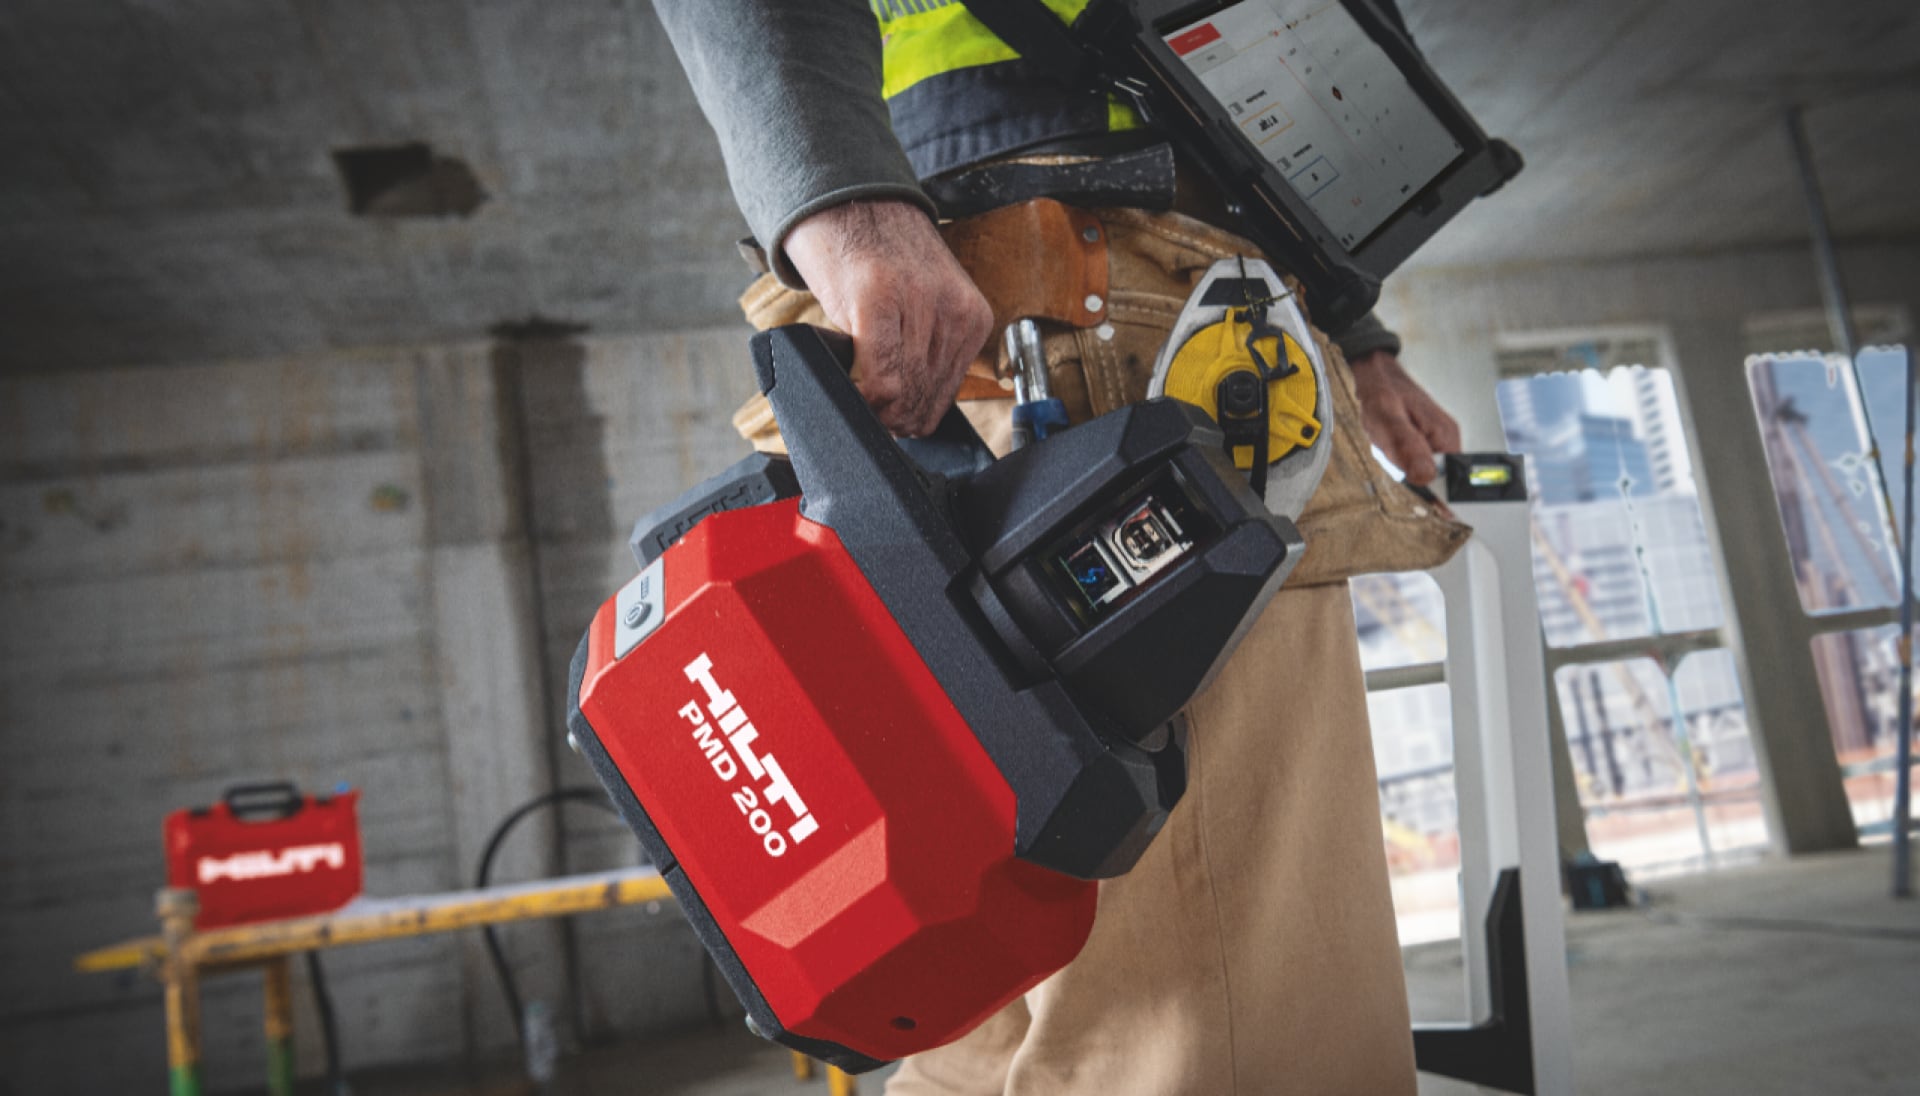 HIlti's cordless PMD 200 laser tool provides the ideal bridge between analogue and digital layout.